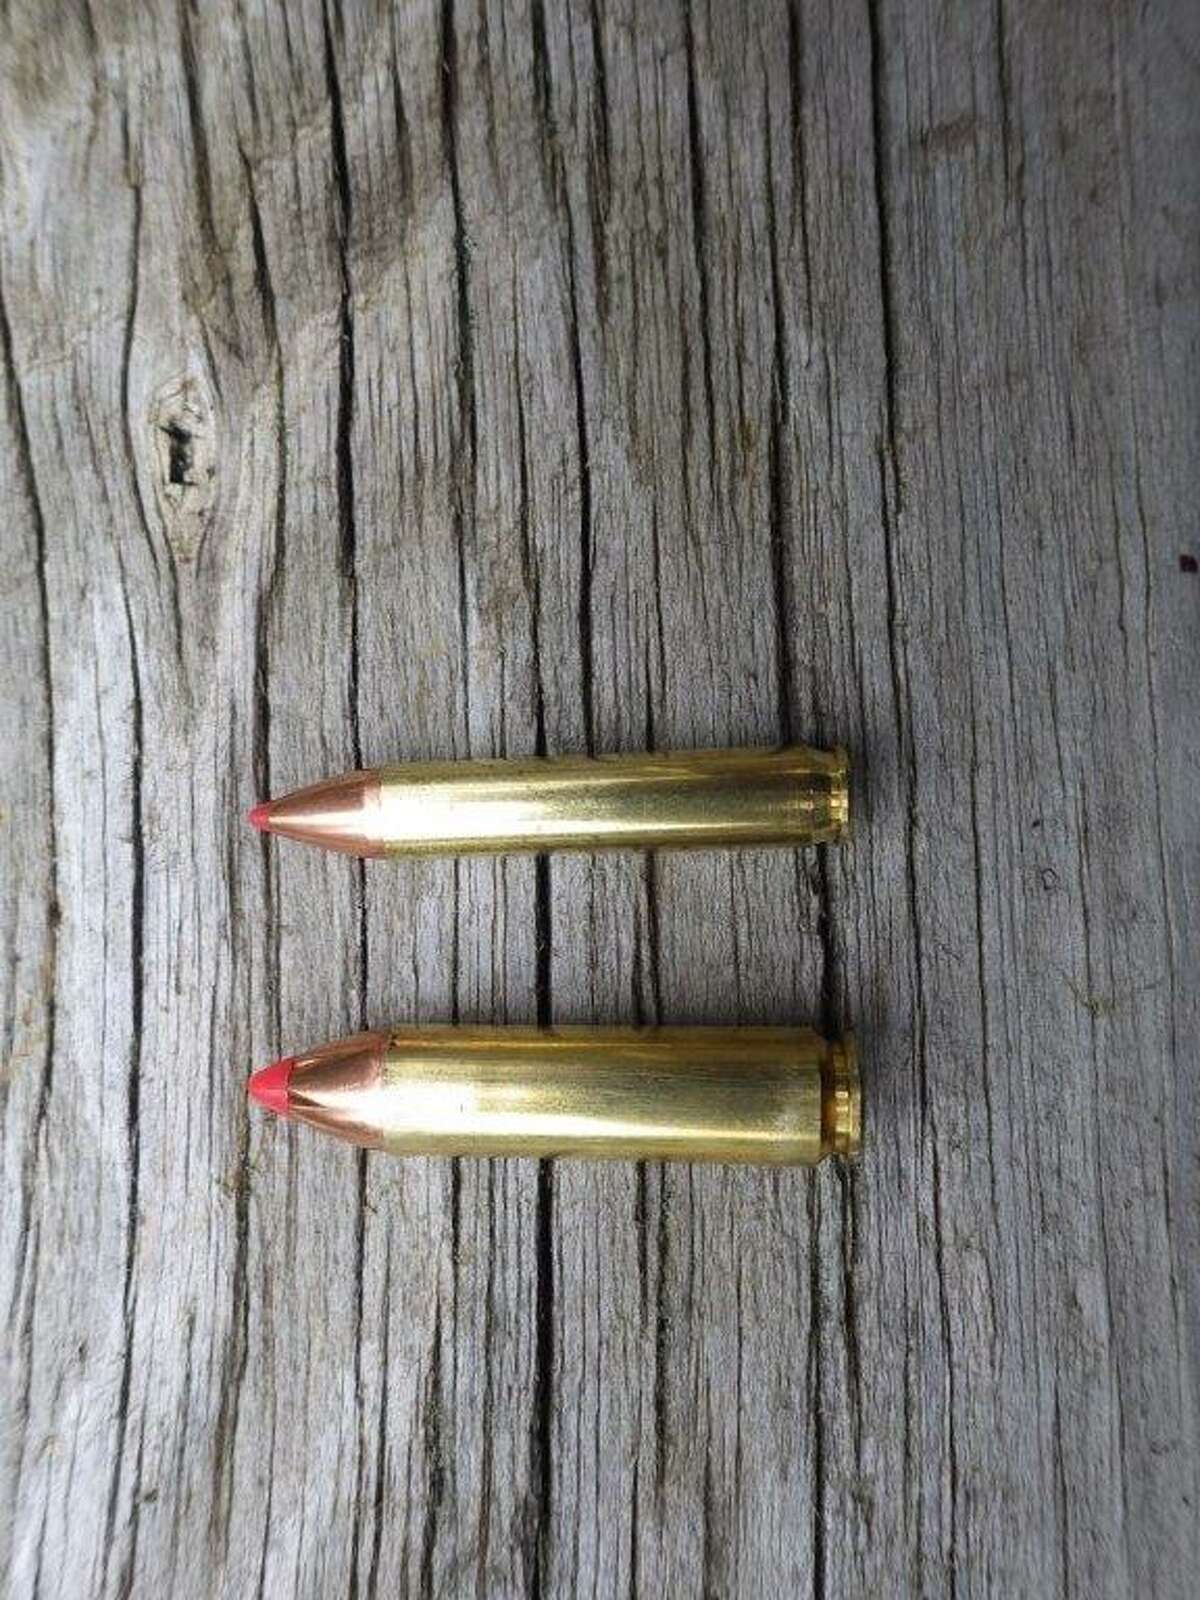 Pictured is the 'Dynamic Duo' for deer hunting in the Michigan's Limited Firearms Zone: (top) .350 Legend, Hornady 165 grain with flex-tip; (bottom) .450 Bushmaster,Hornady 250 grain with flex-tip. Both calibers have a lot of offerings in different brands and weight sizes.